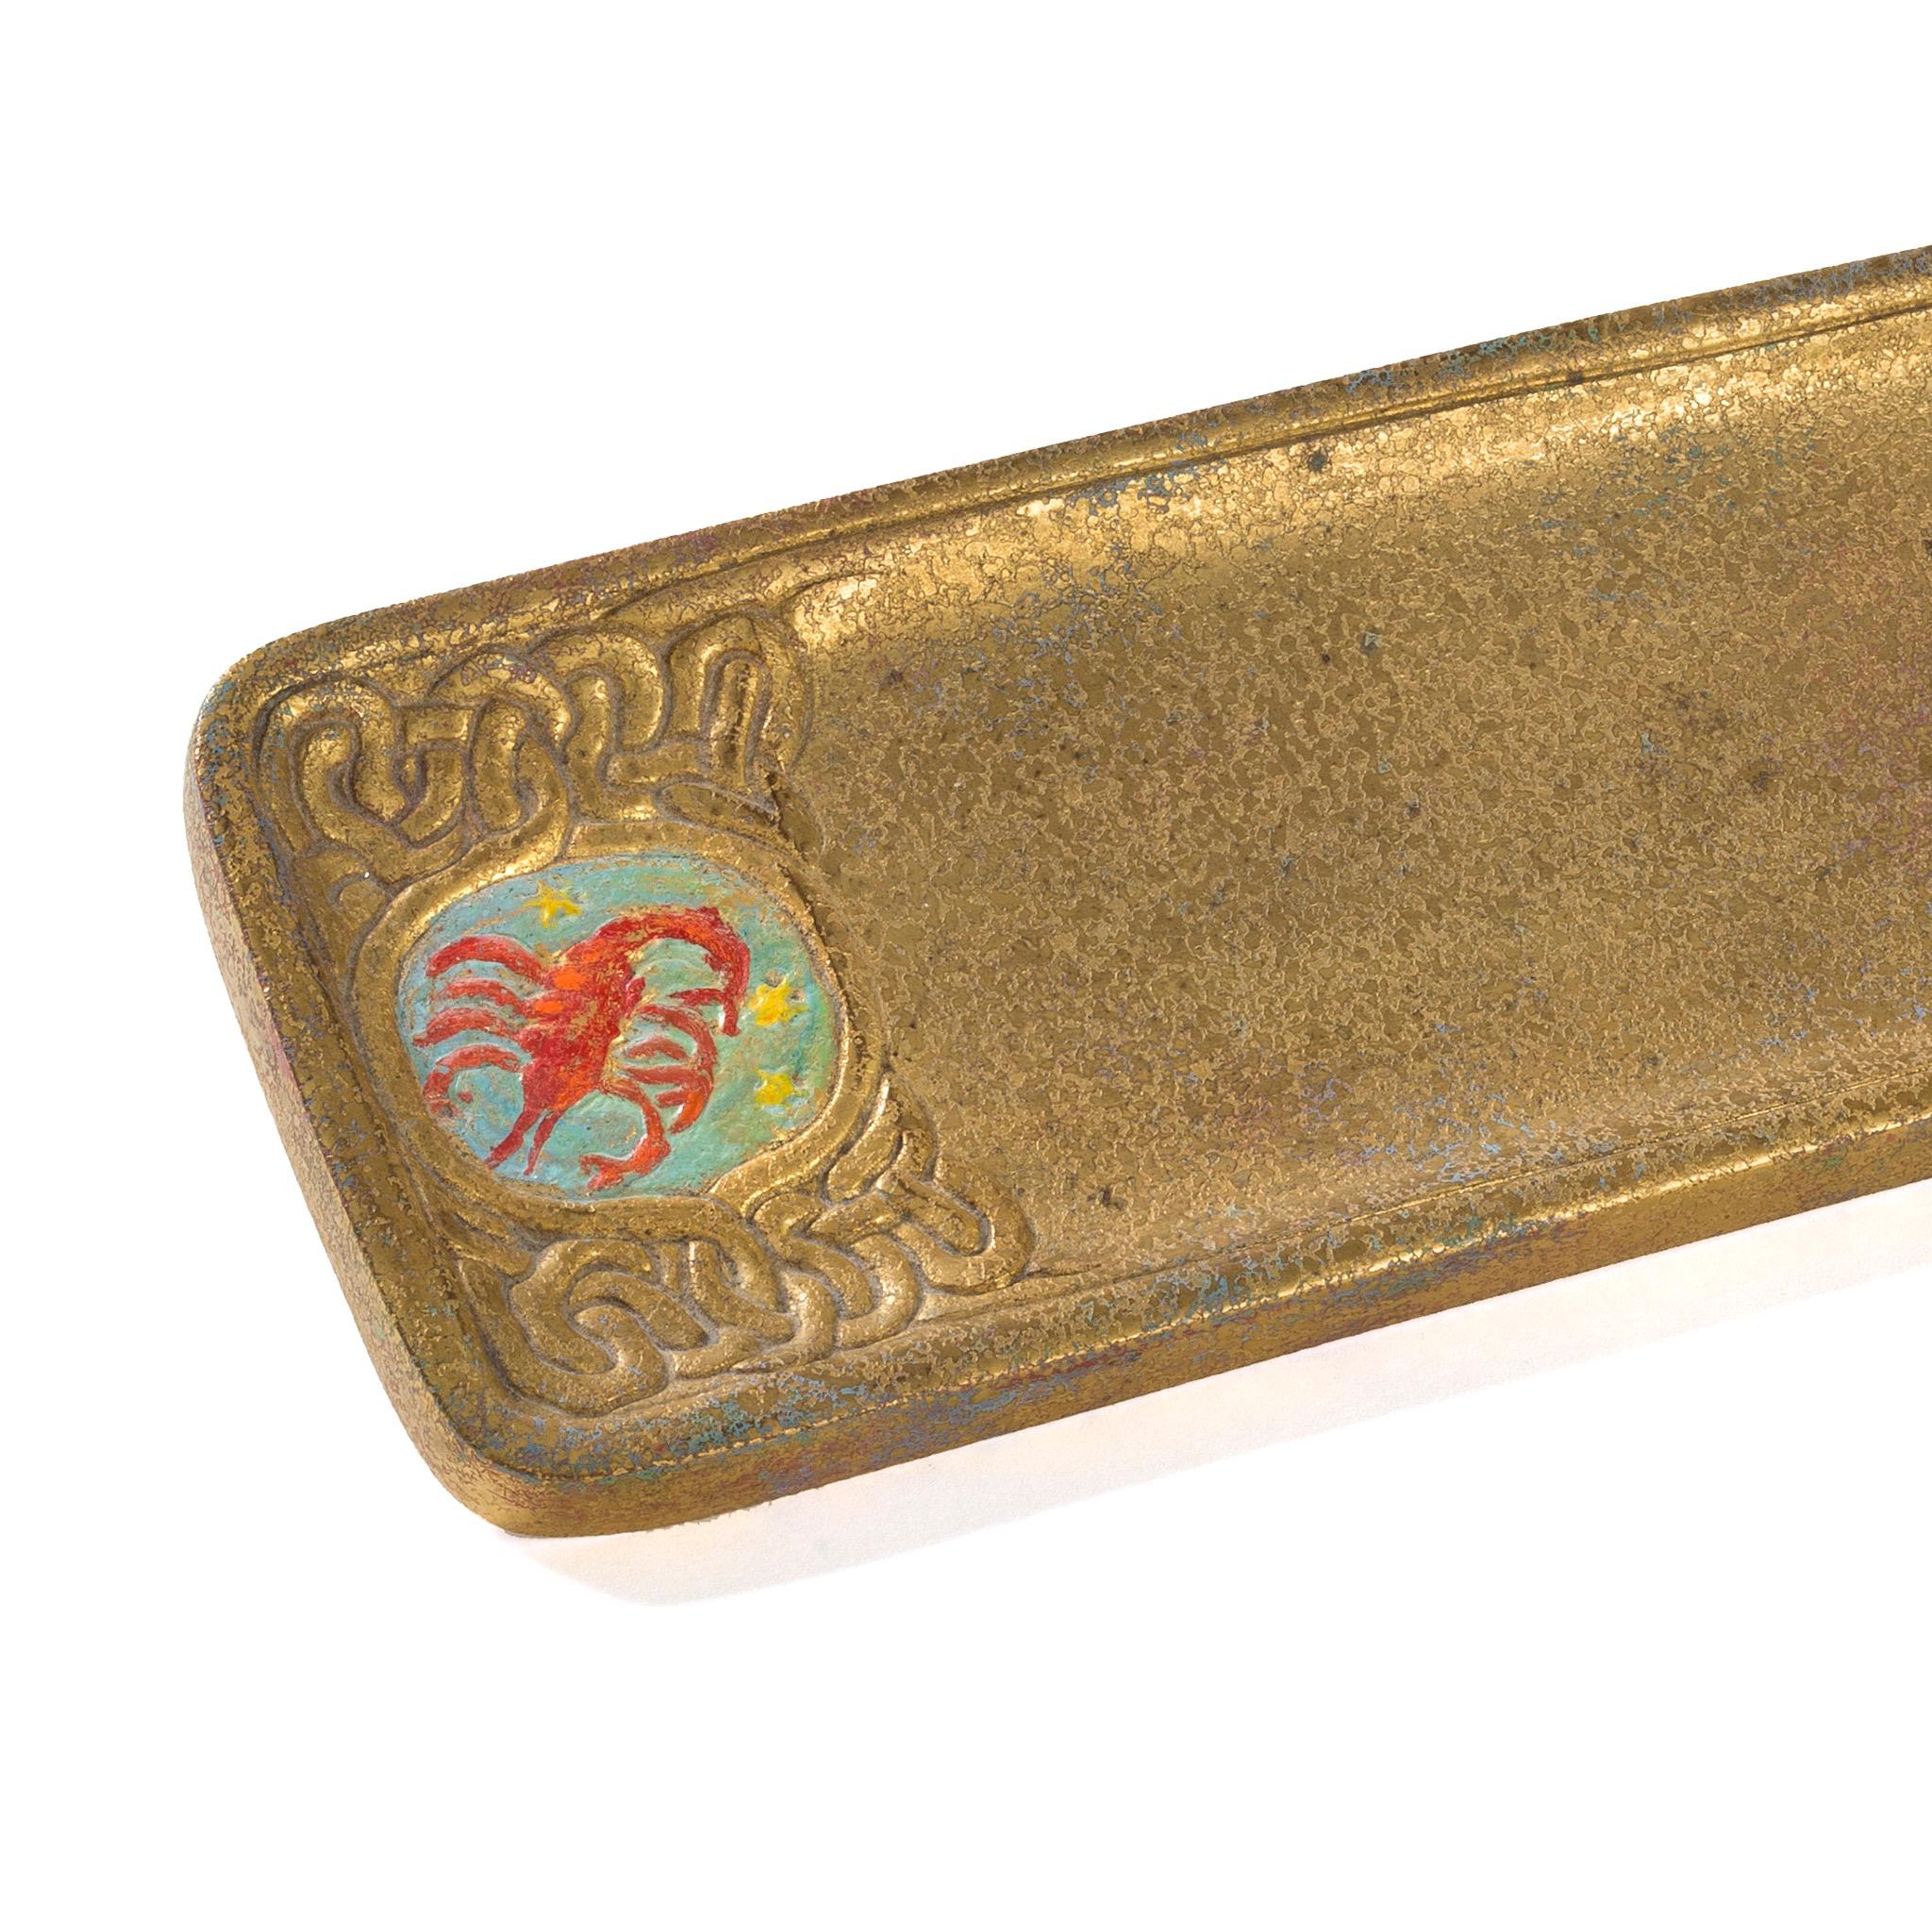 A gilt bronze “Zodiac” pen tray by Tiffany Studios New York. The pen tray features intricate pseudo-Celtic patterning interspersed with circular elements in sky blue, each of which features a stylized depiction of one of the 12 signs of the Zodiac,